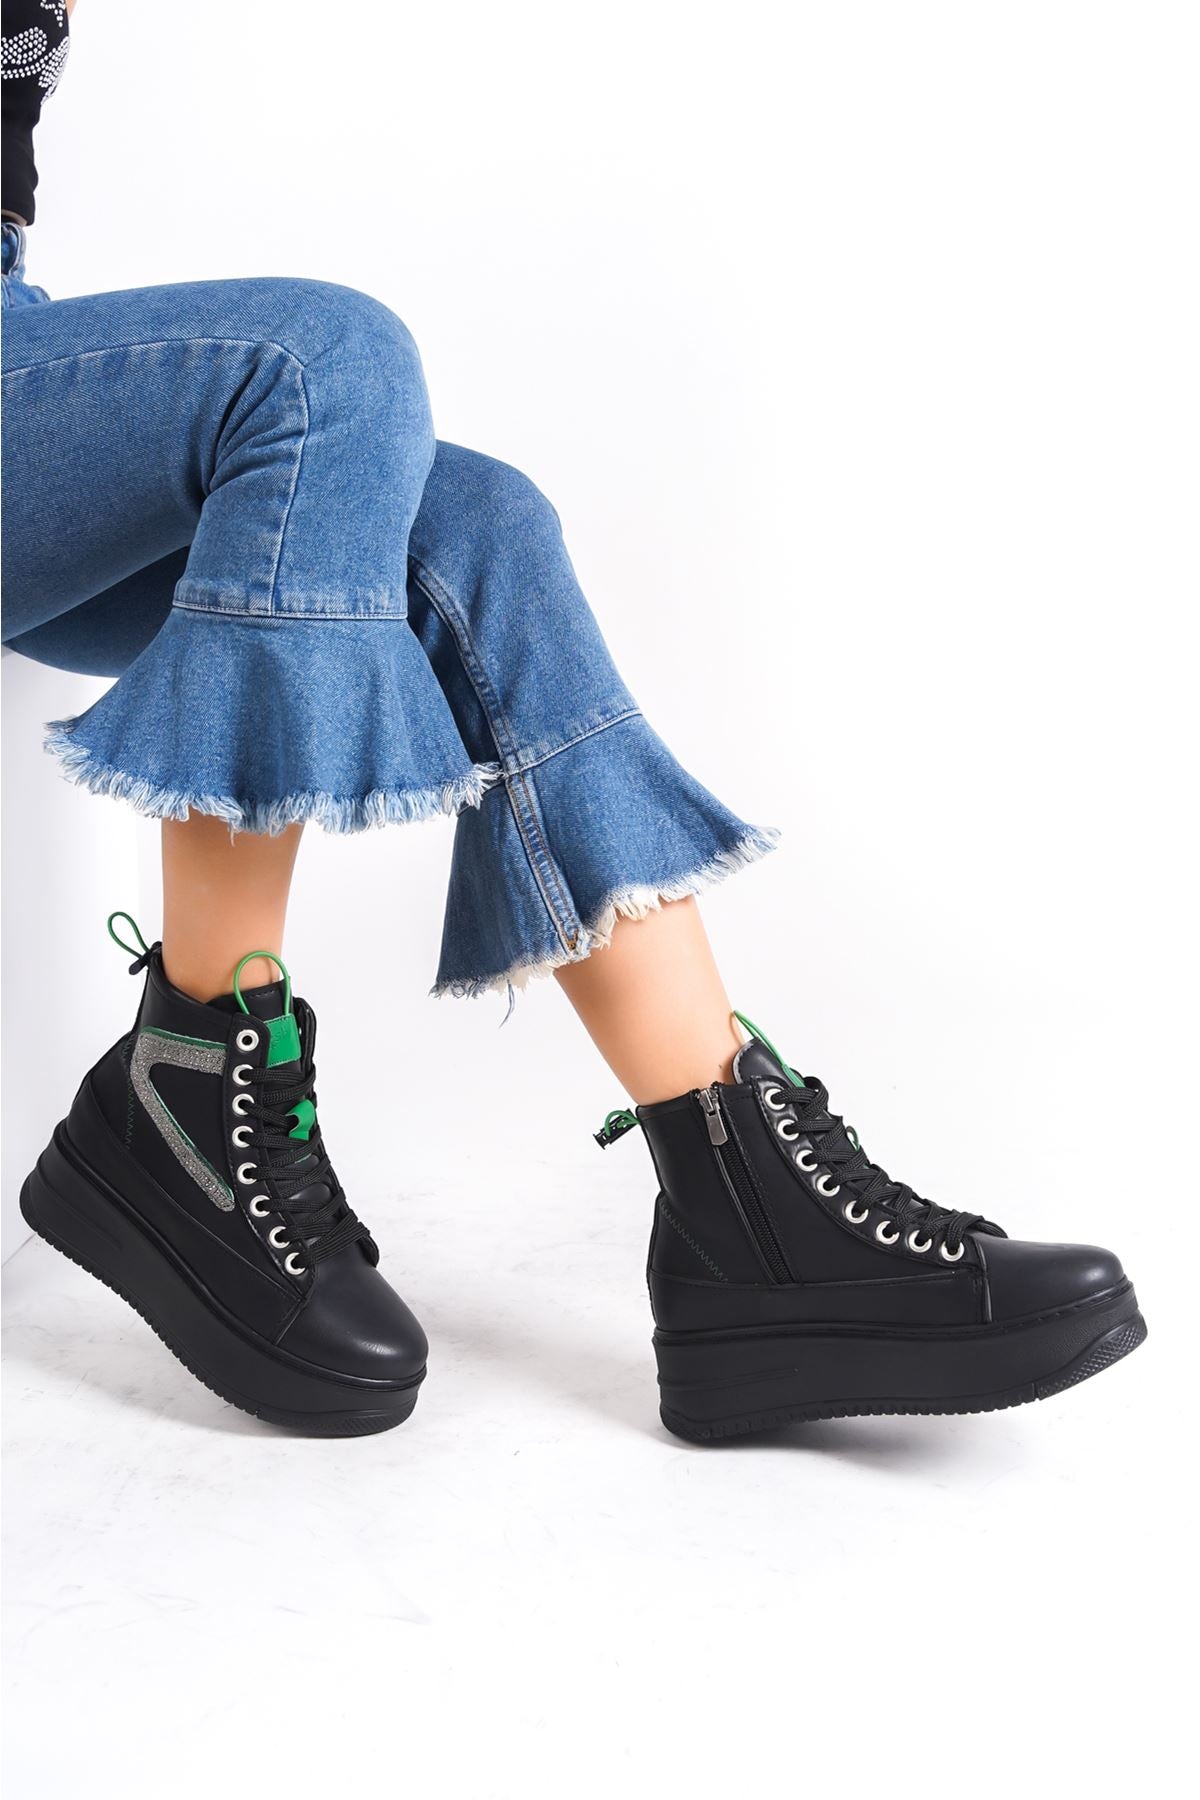 Women's Black Thick Soled Sports Boots with Green Detail - STREETMODE™